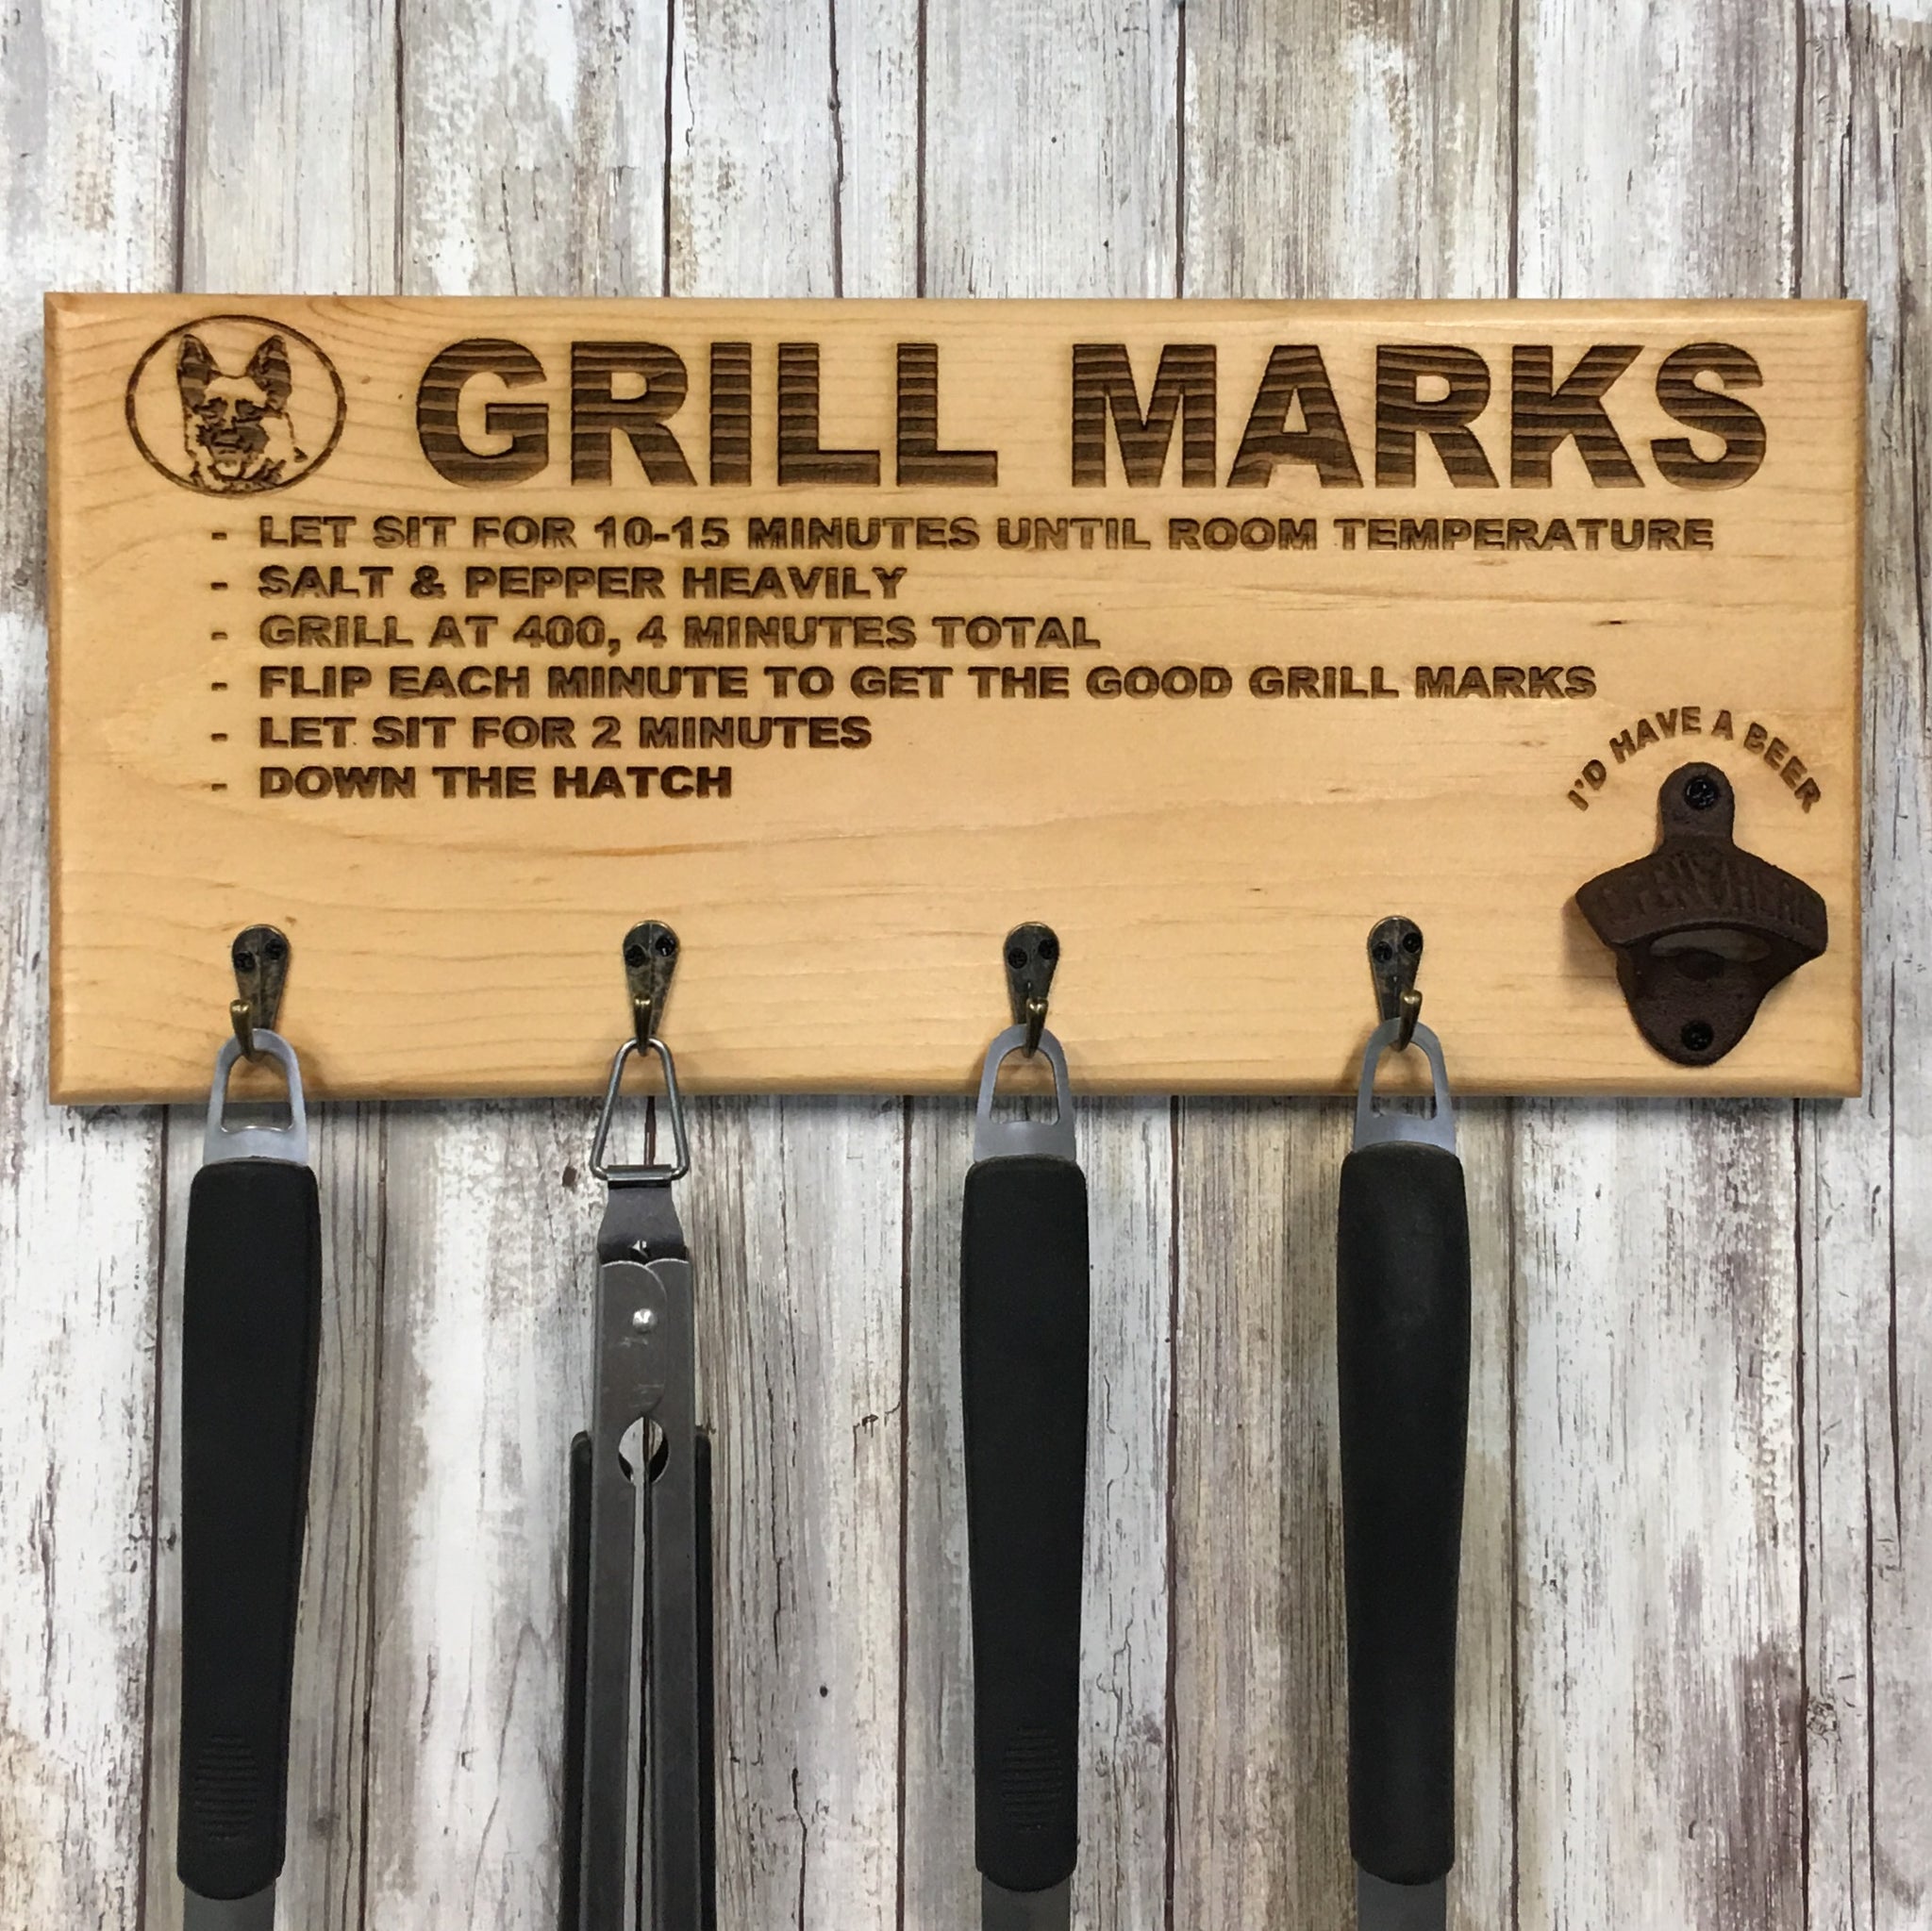 Letterkenny Grill Marks Barbecue Tool Holder with Beer Opener - Laser ...